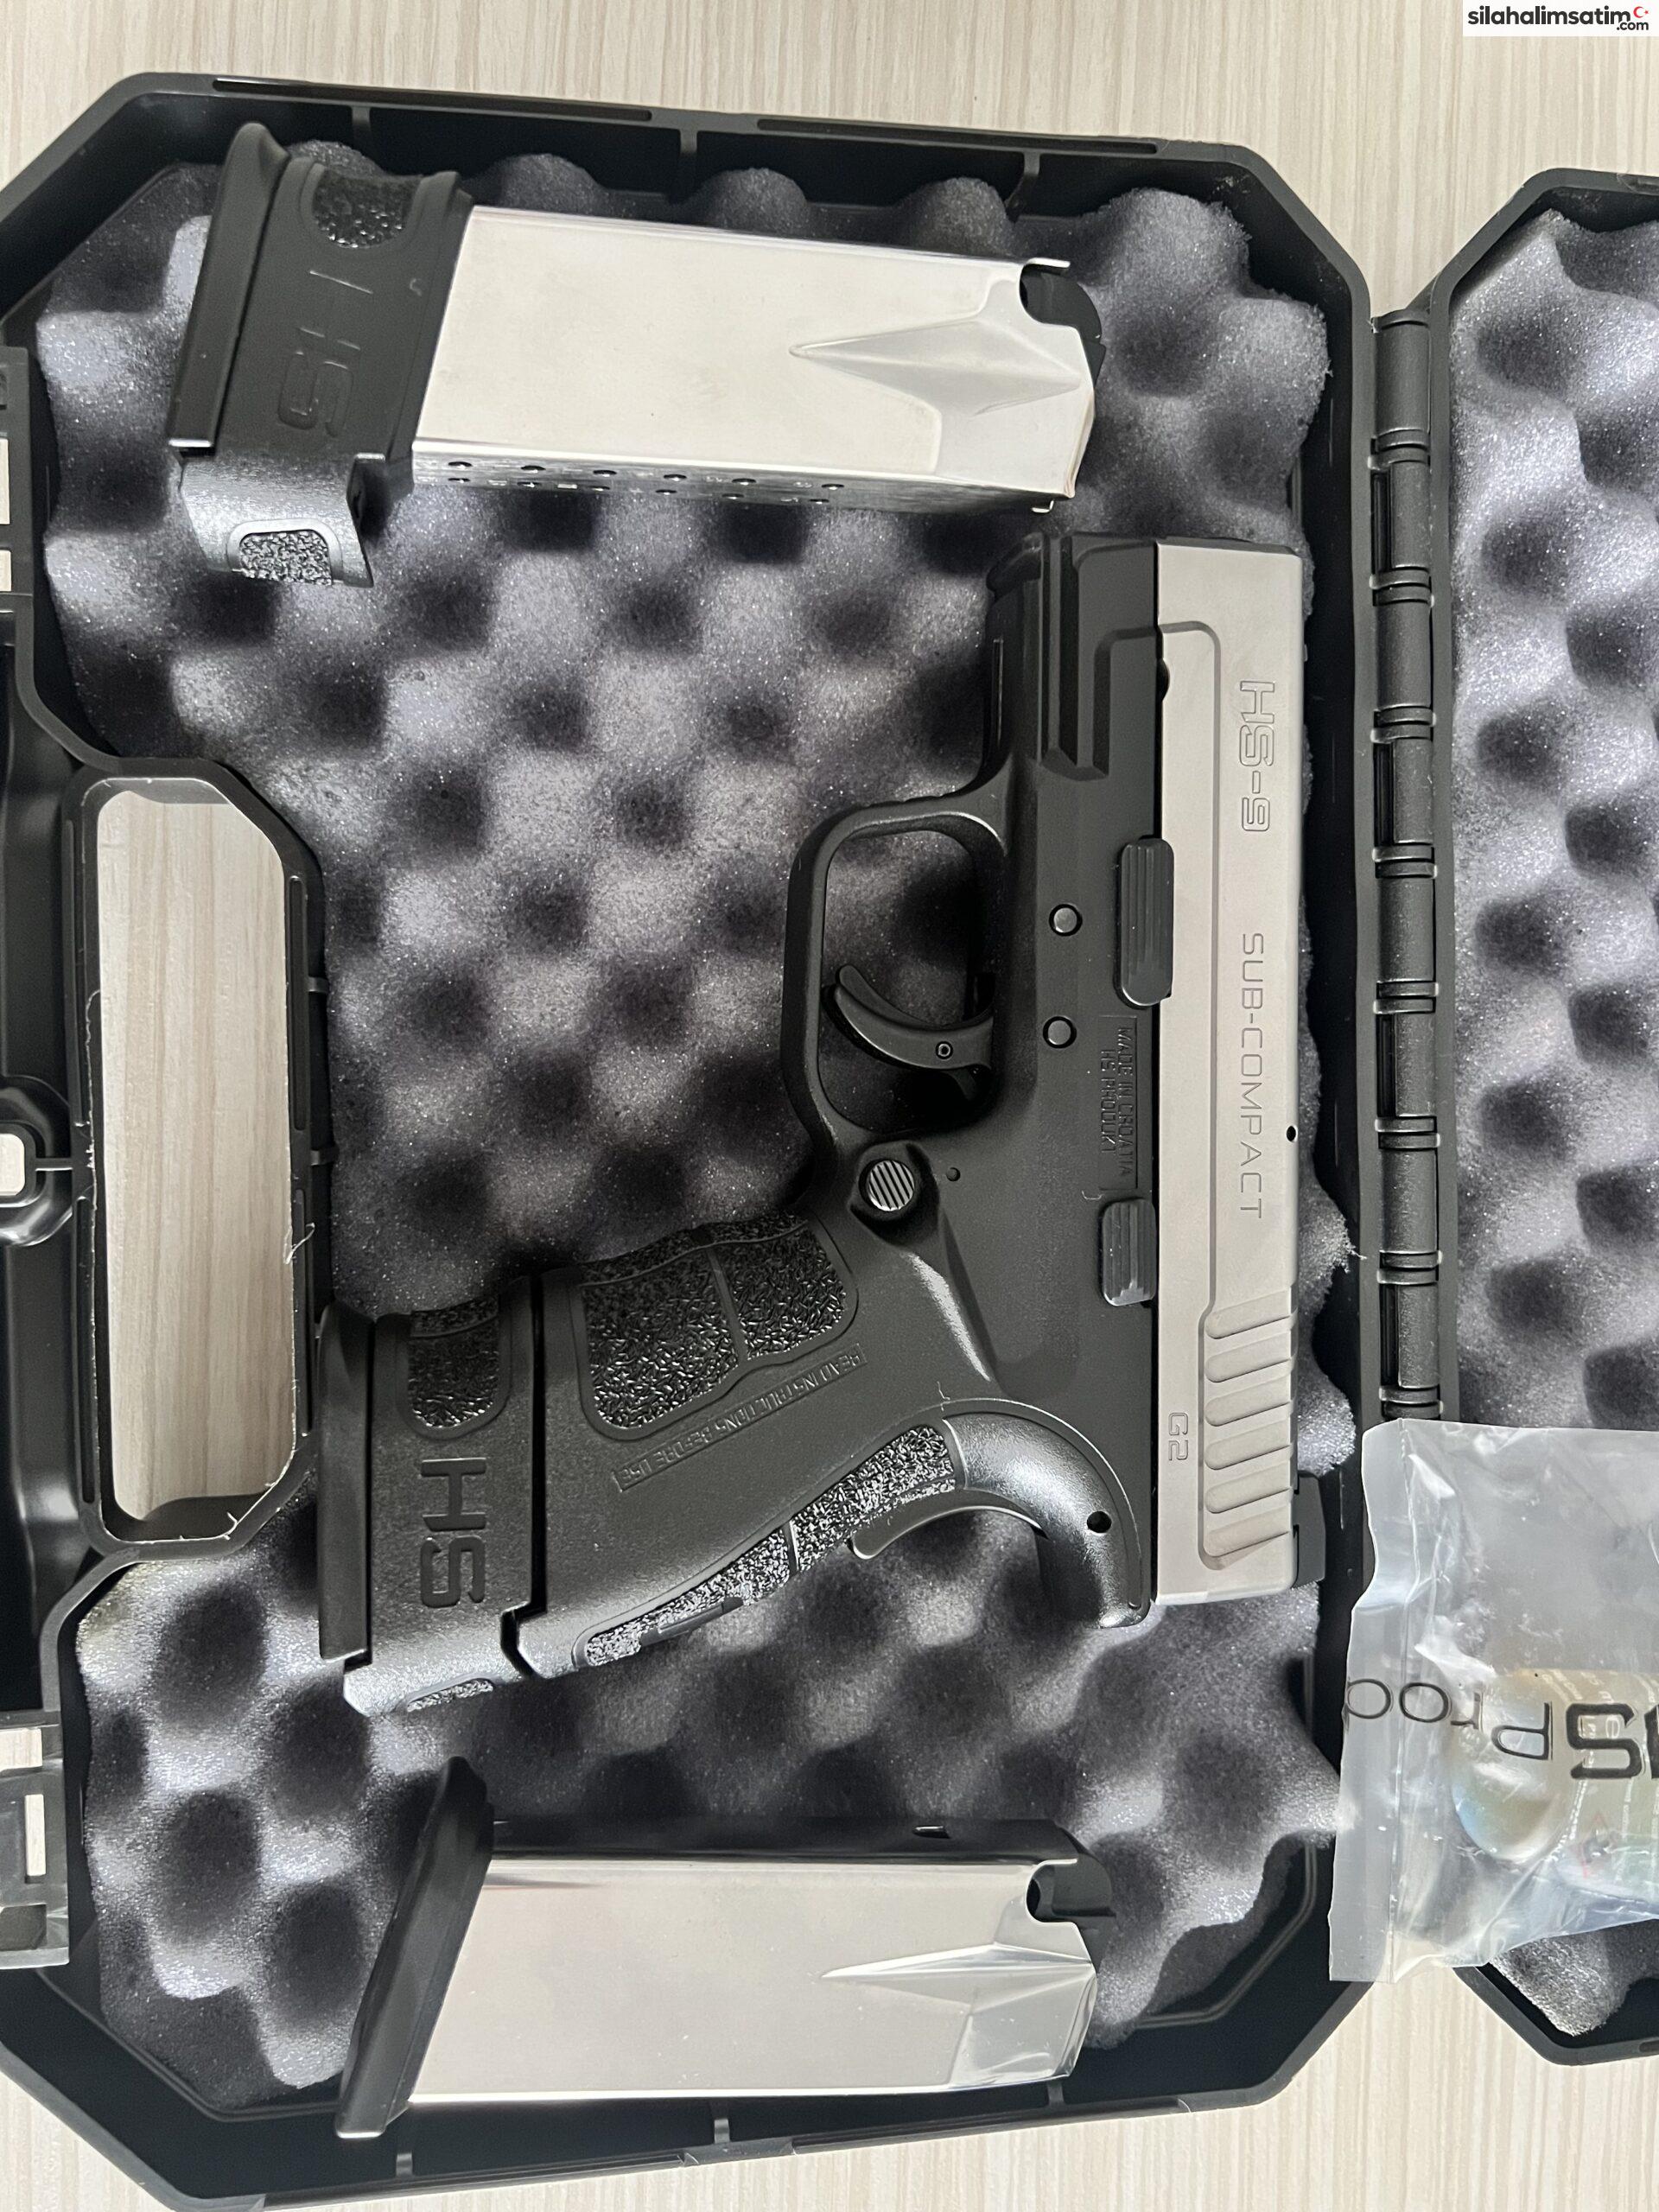 HS-9 SUB COMPACT G2 3.0 SS